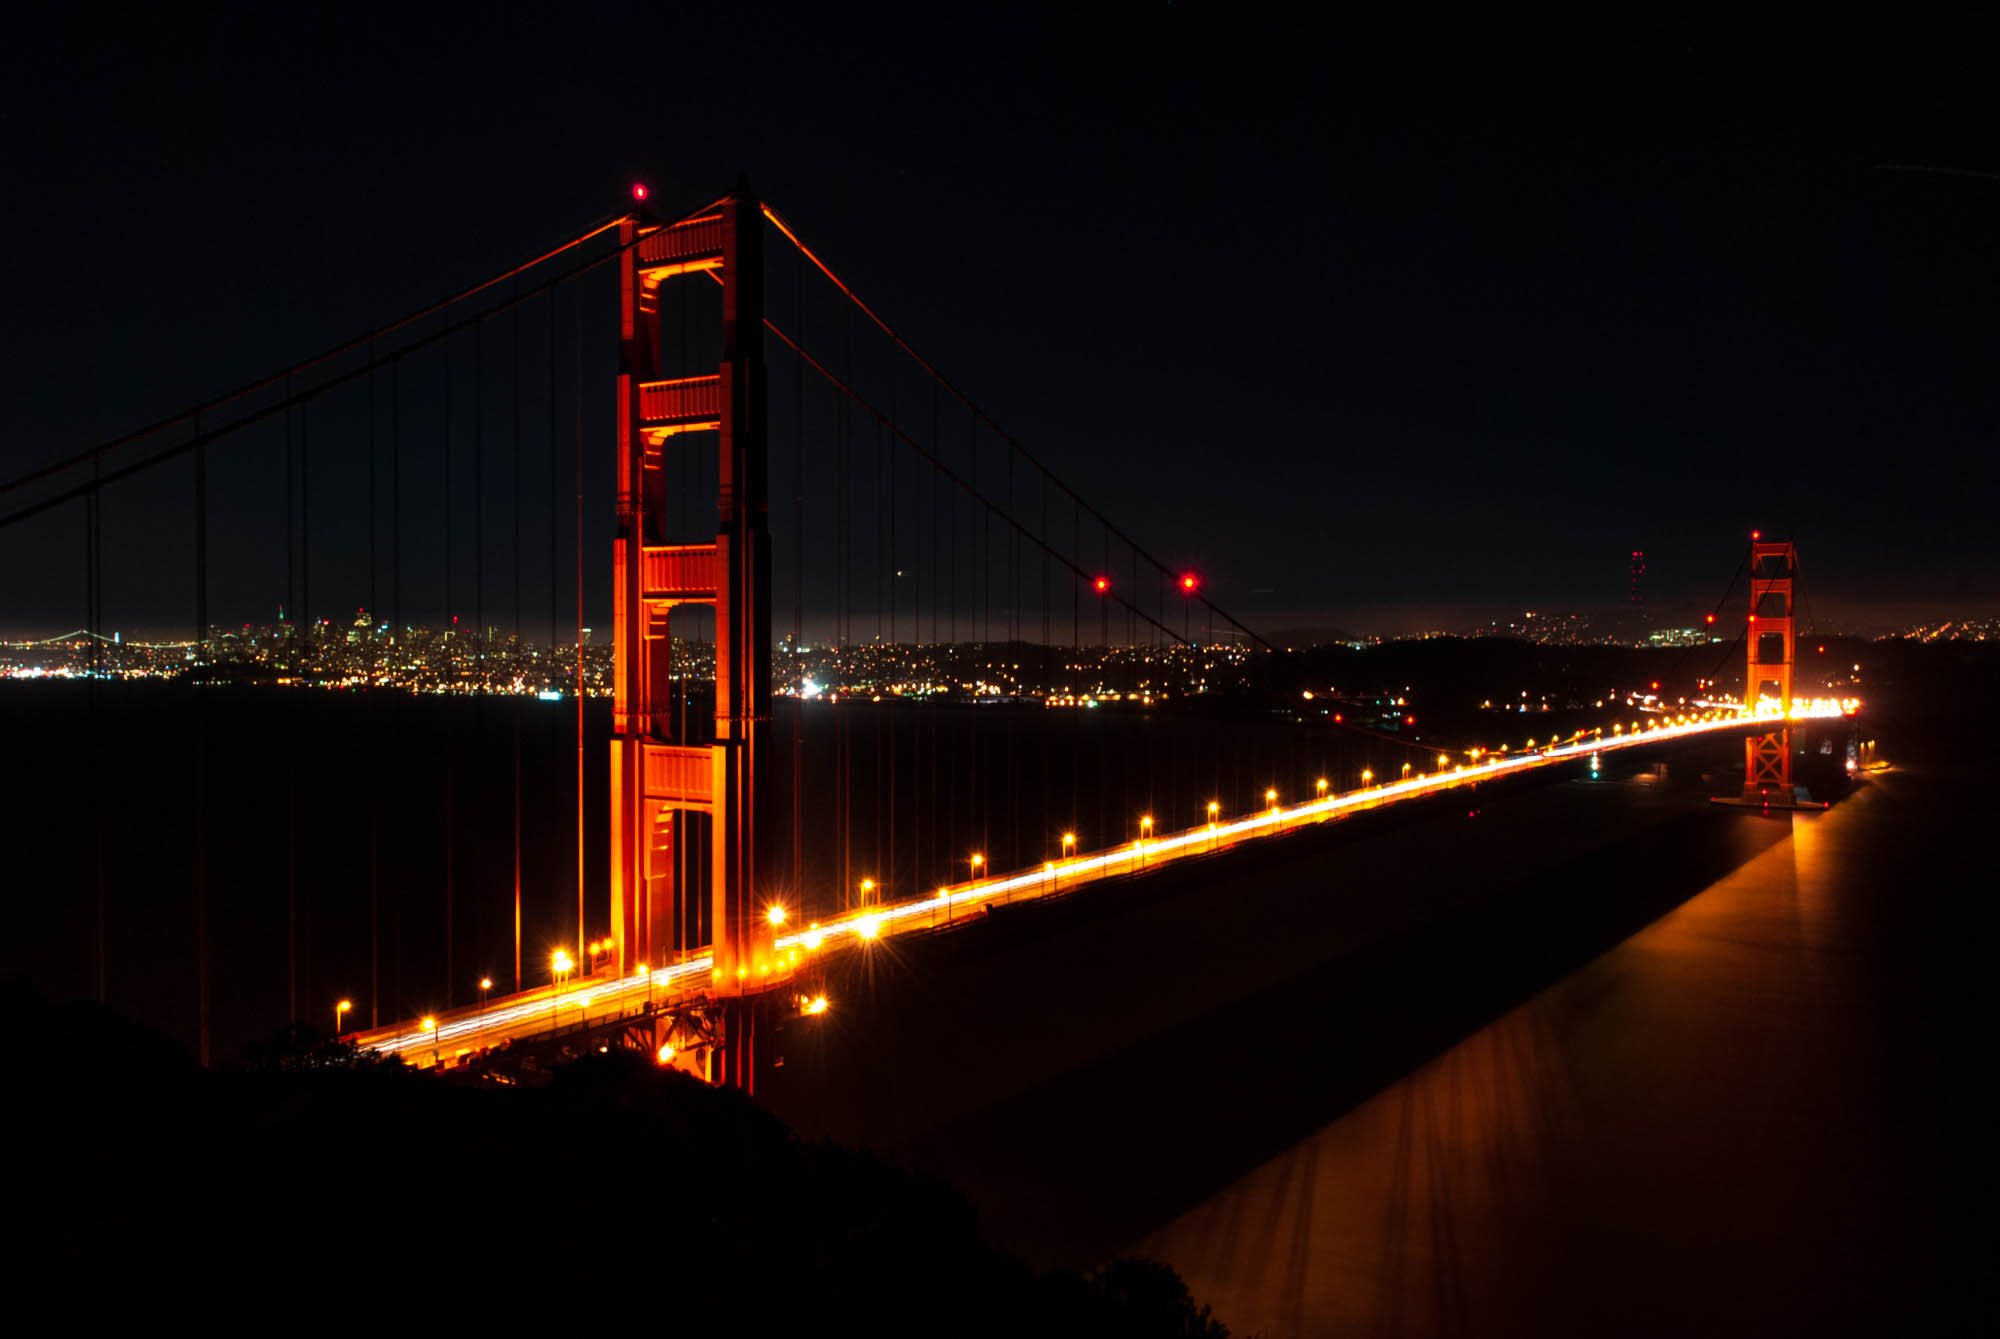 The Golden Gate Bridge at night with San Francisco in the background